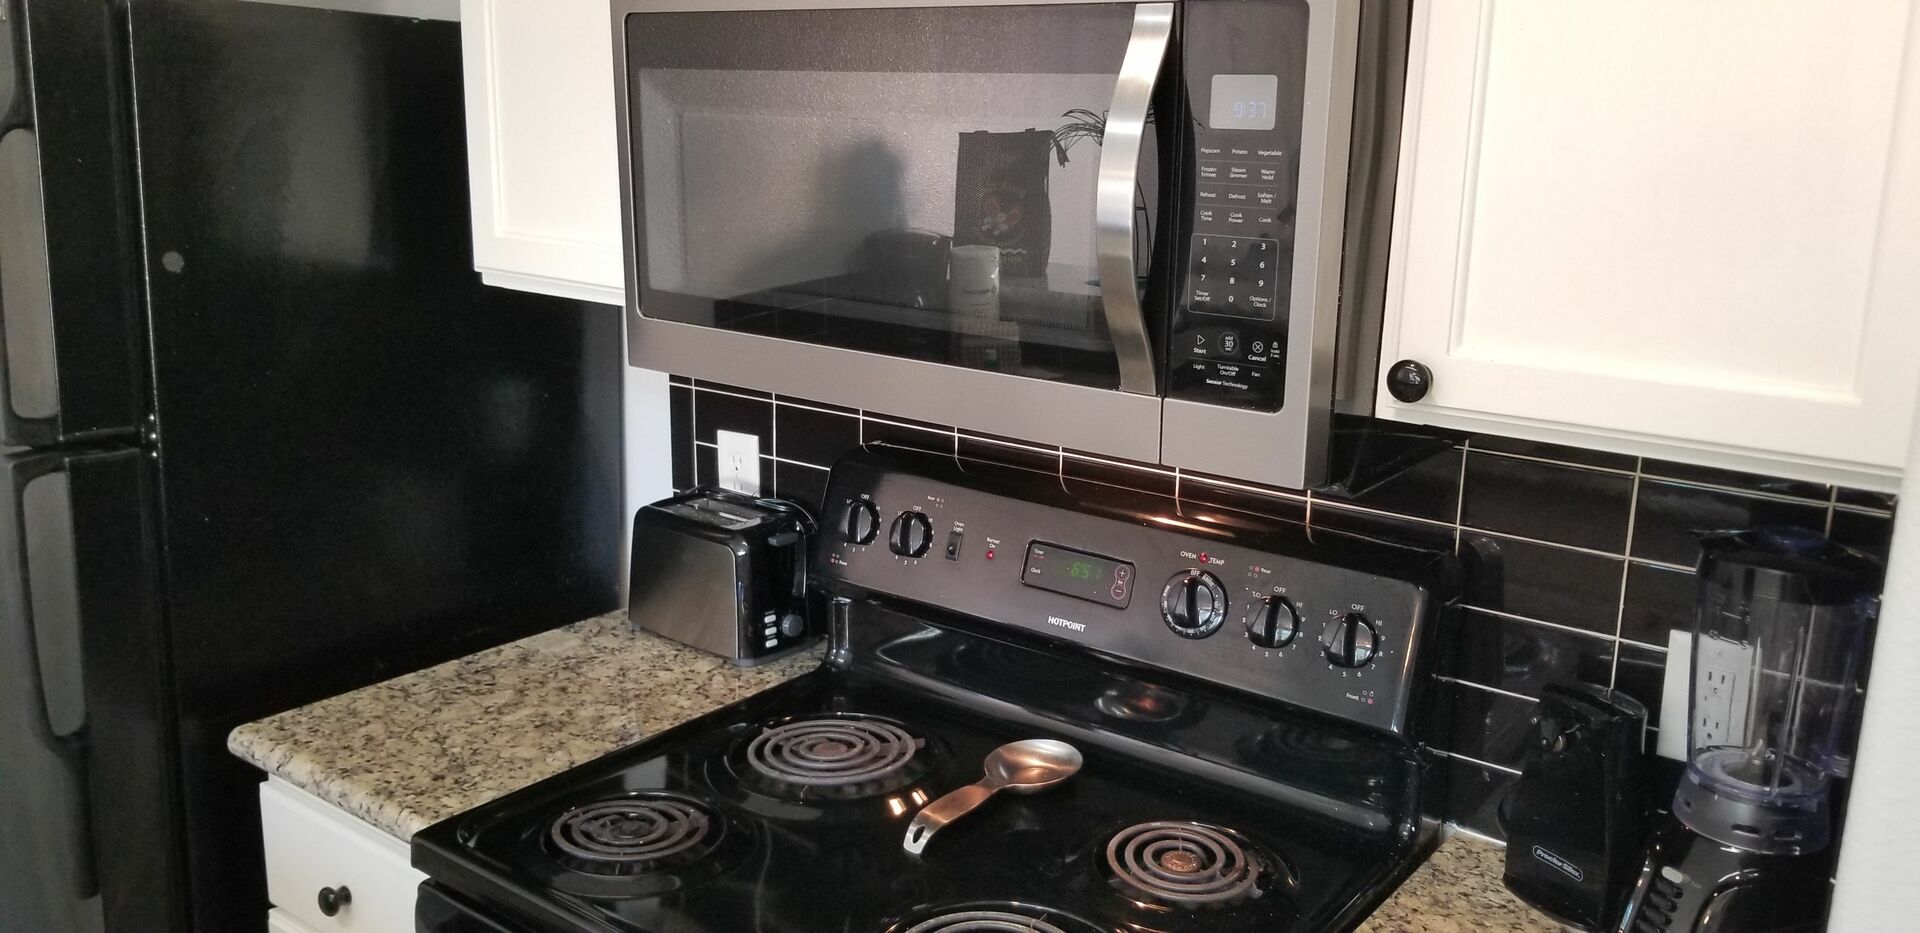 The condo offers a full-size electric stove and oven, microwave, and full-size refrigerator.